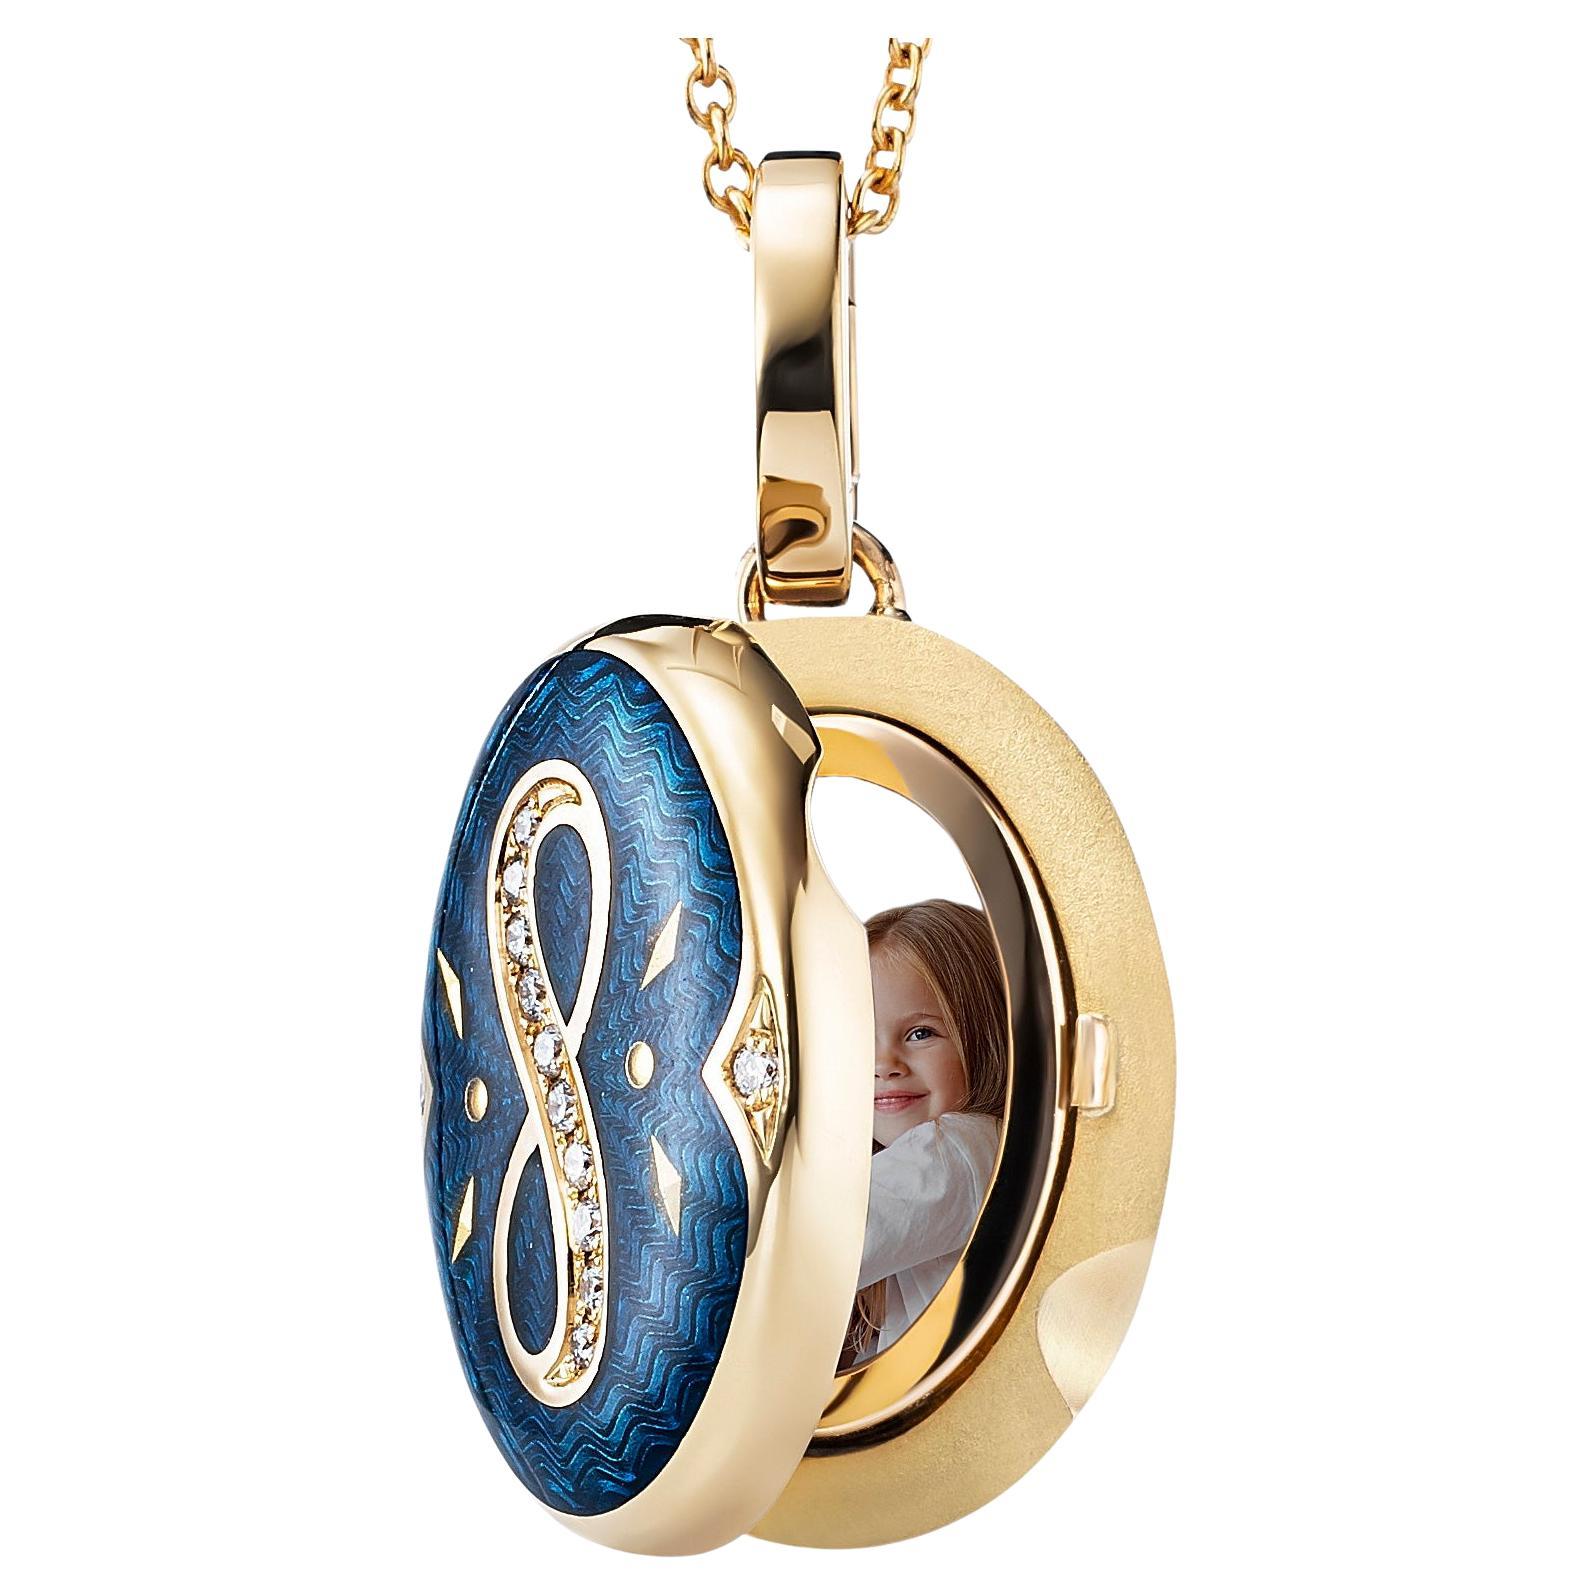 Victor Mayer oval locket pendant with infinity symbol 18k yellow gold, Victoria Collection, translucent peacock blue vitreous enamel, gold paillons, 12 diamonds, total 0.08 ct, G VS, brilliant cut, measurements app. 15.0 mm x 20.0 mm

About the